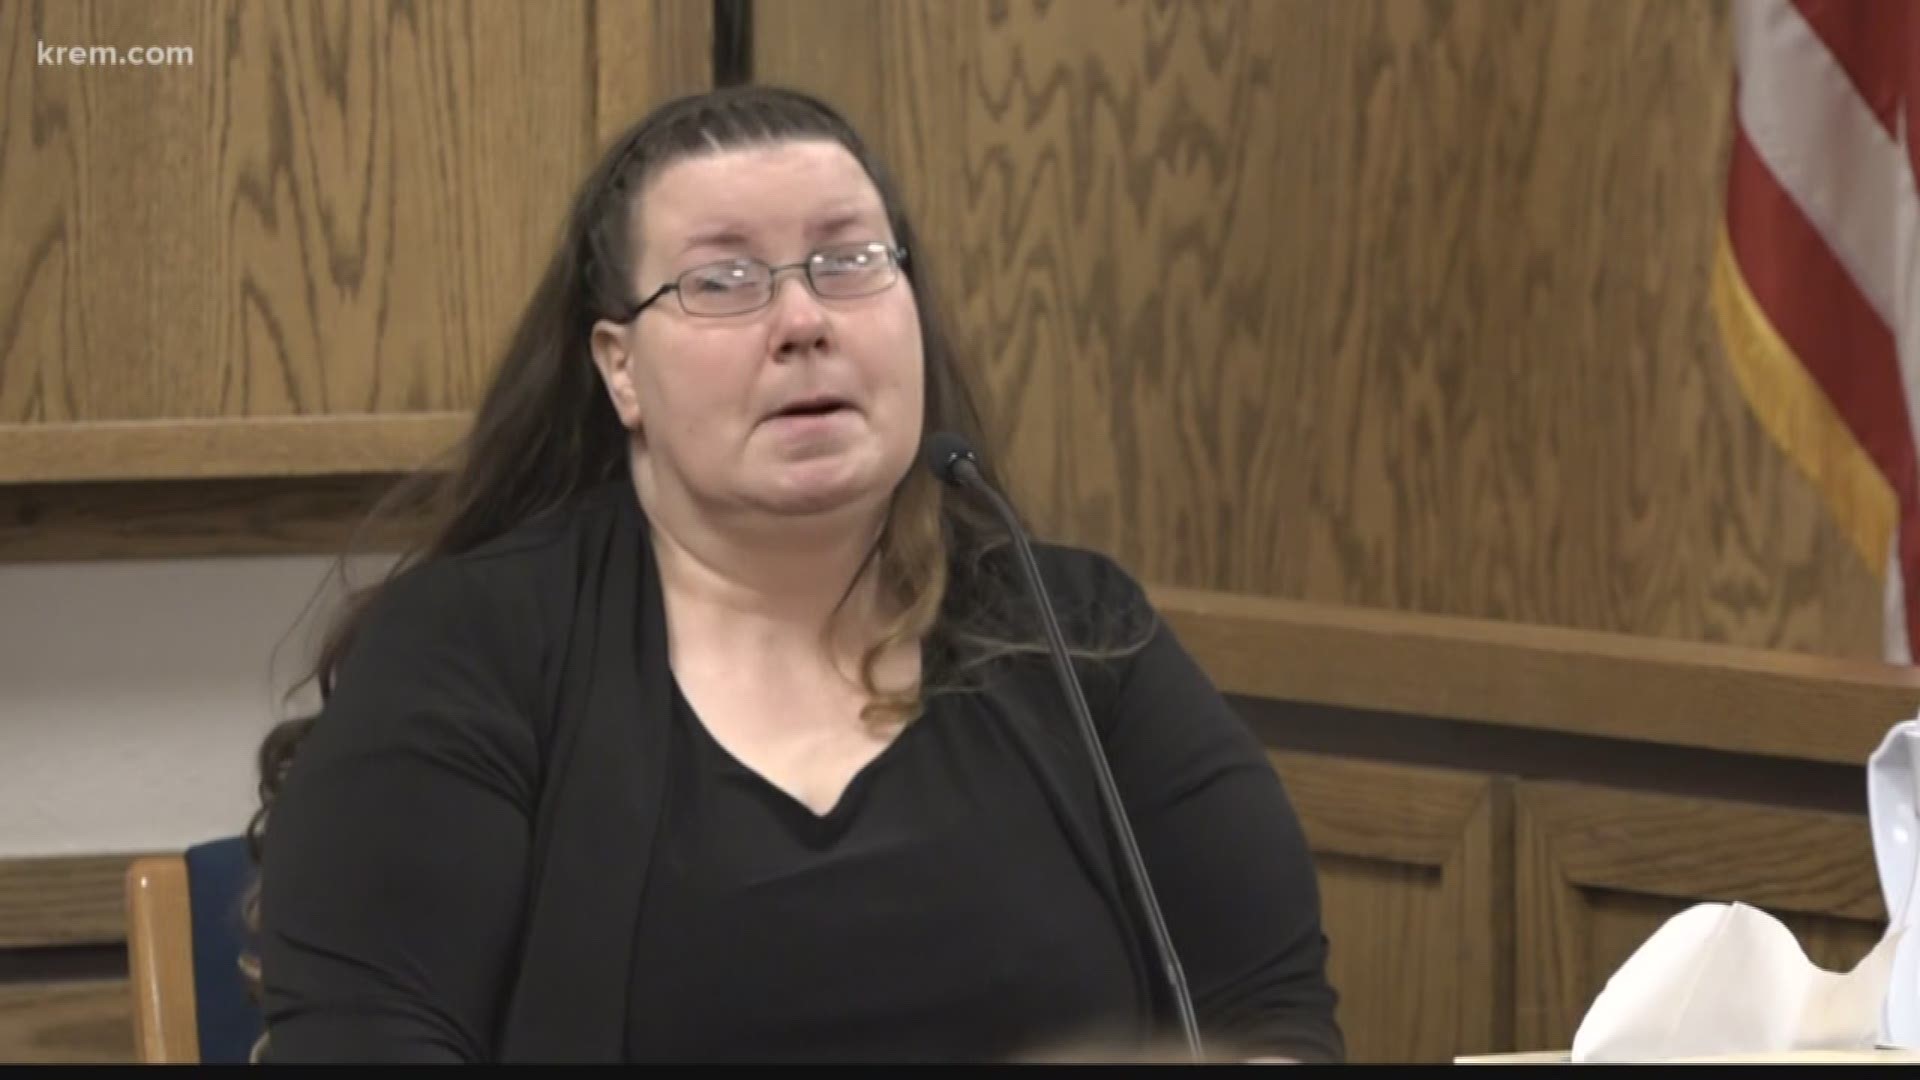 Investigators say she tried to hire someone to kill her husband. Wednesday, Martie Soderberg testified in her own trial. (3-21-18)